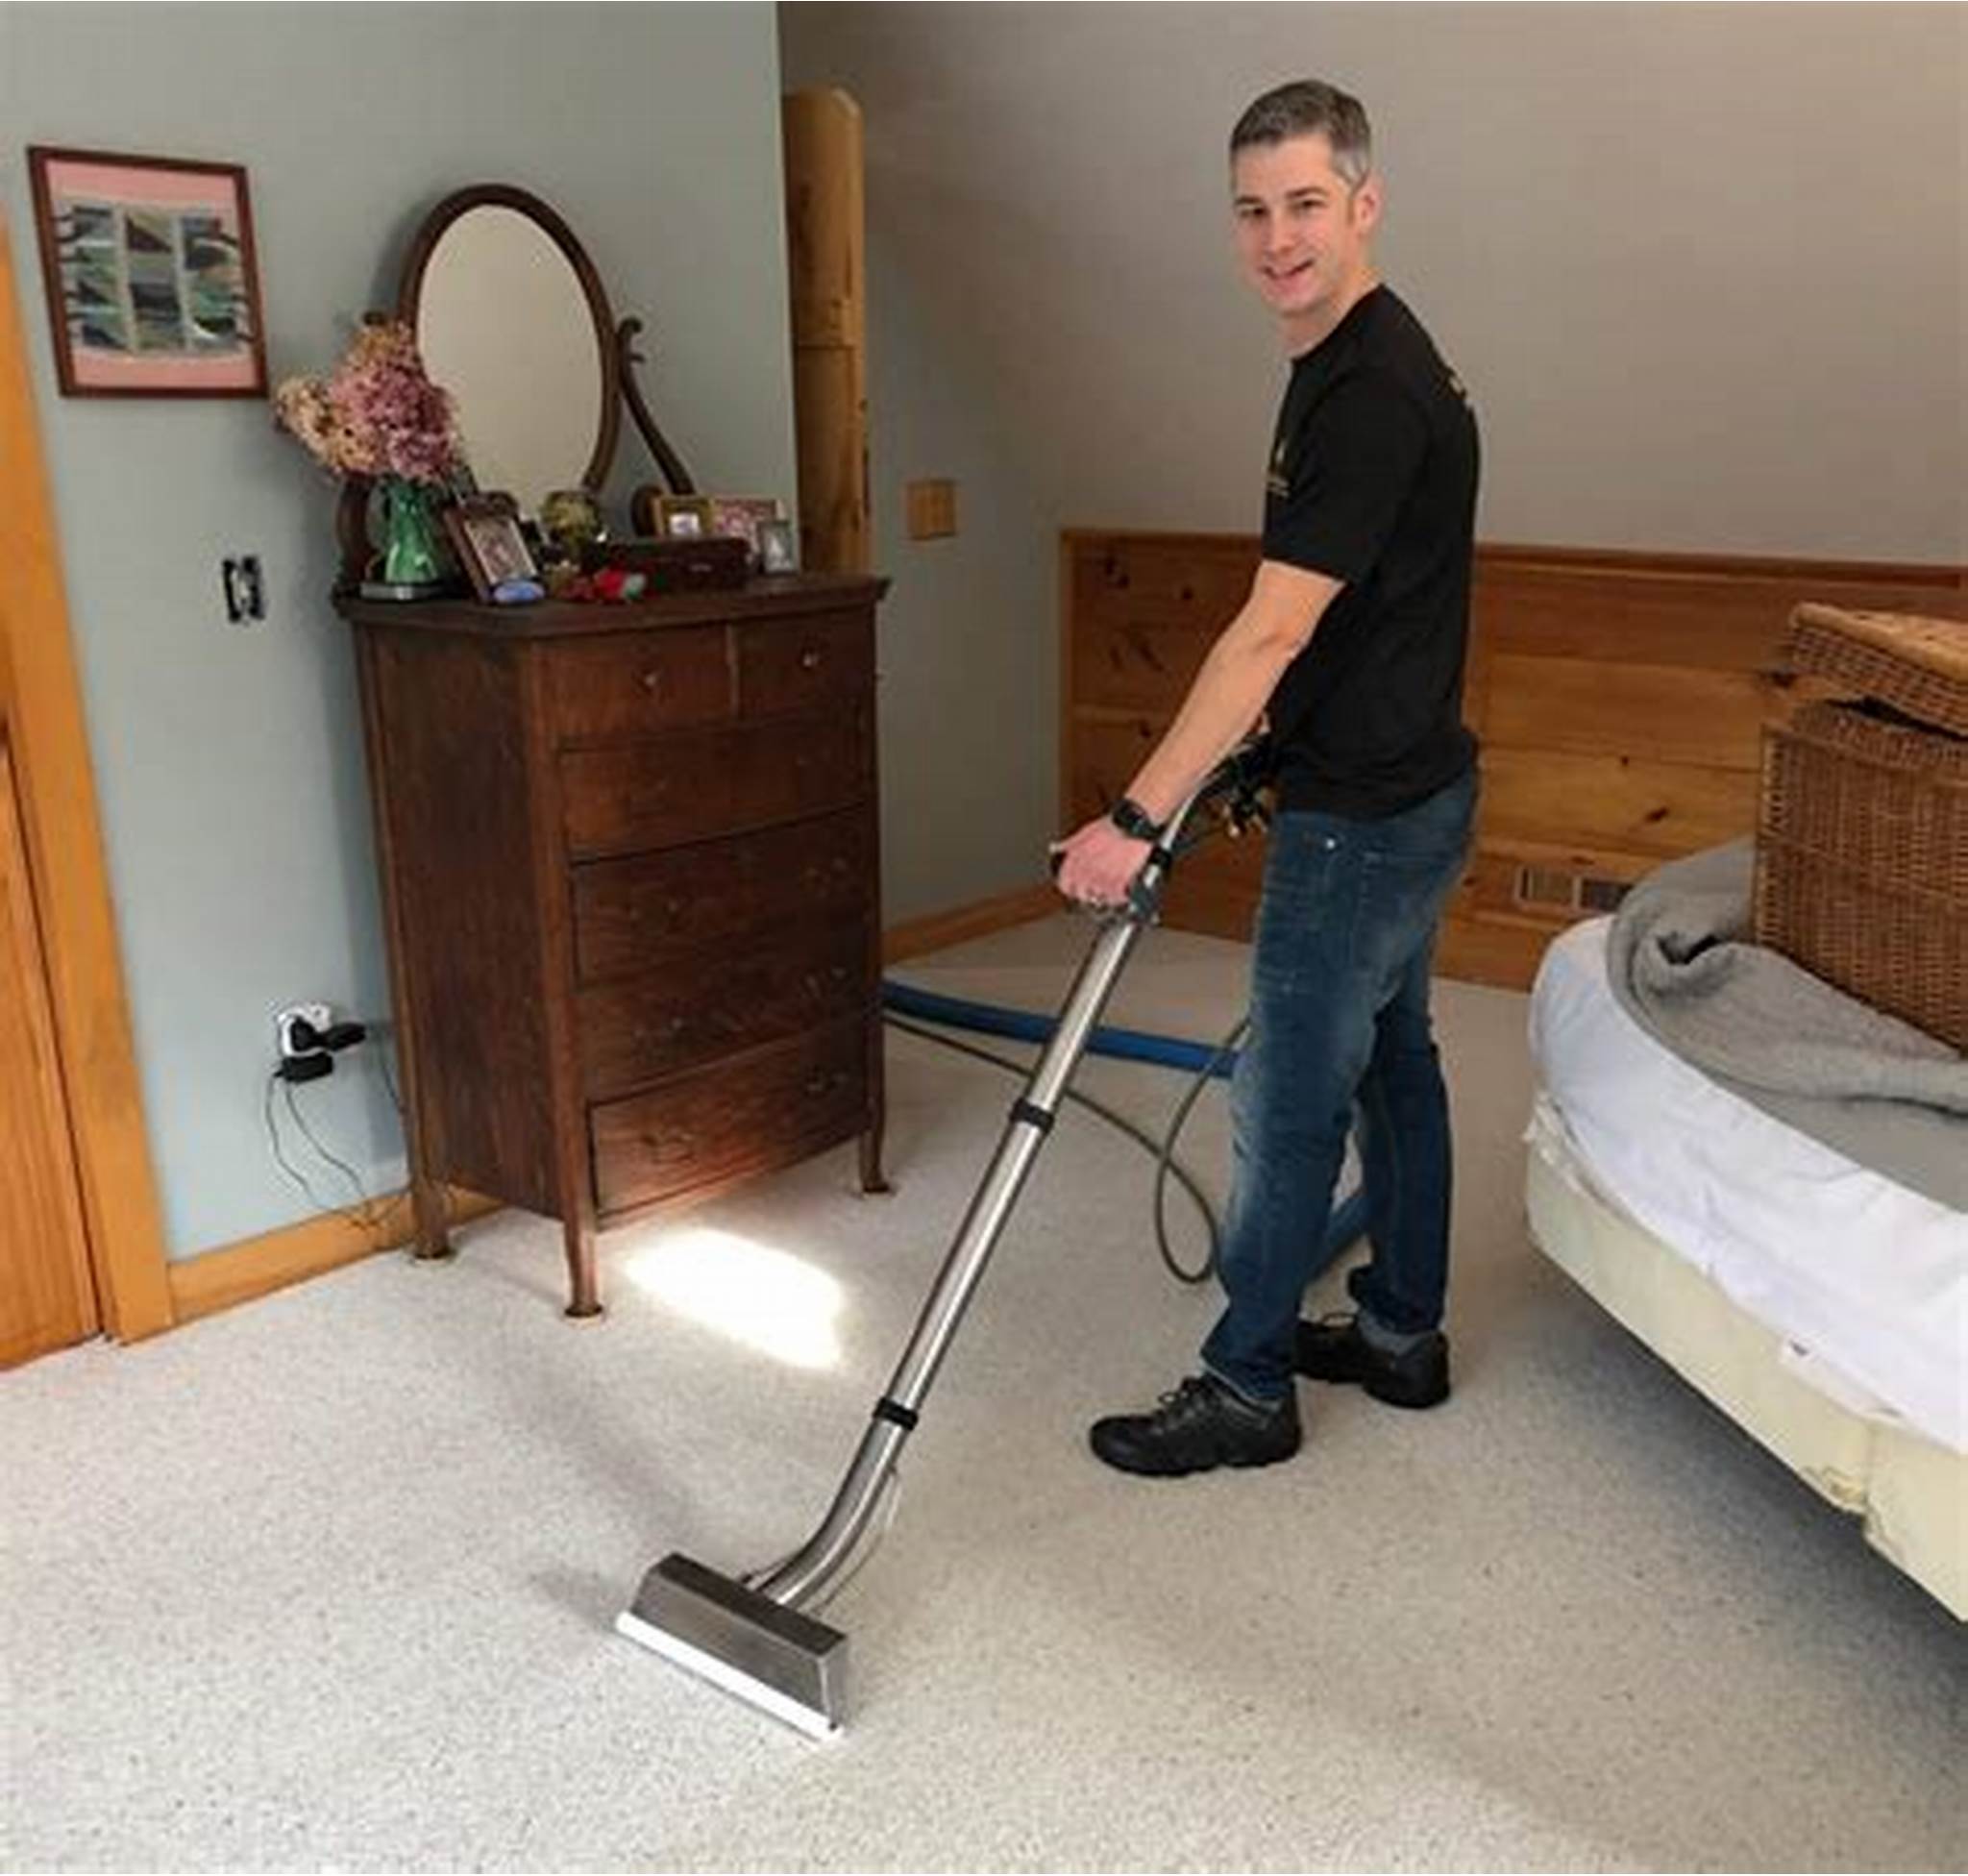 Carpet Cleaning Services Near Me